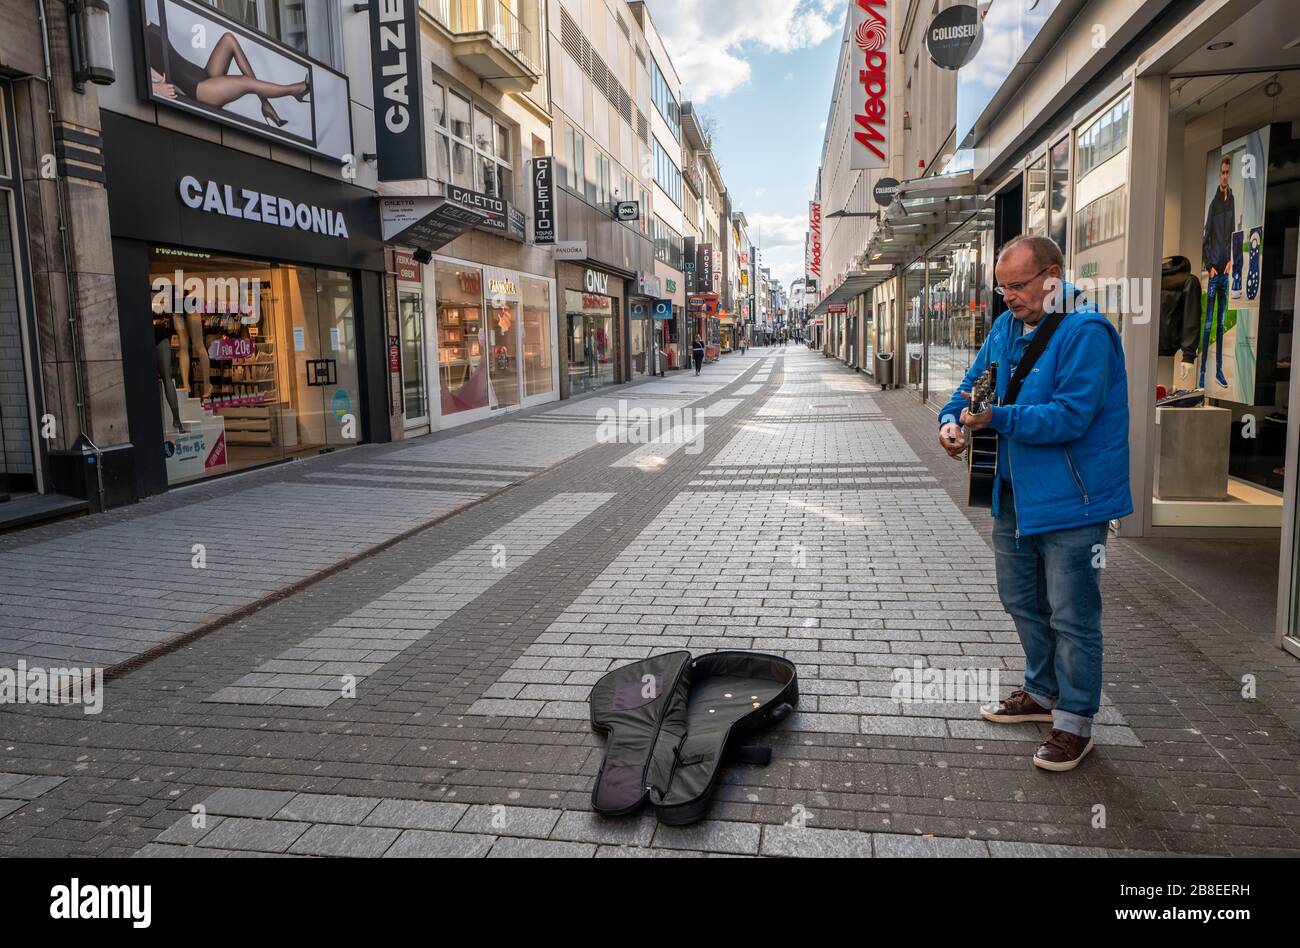 Effects of the coronavirus crisis, empty shopping street, lonely street musician, around 1400 on Saturday, normally thousands of people go shopping he Stock Photo